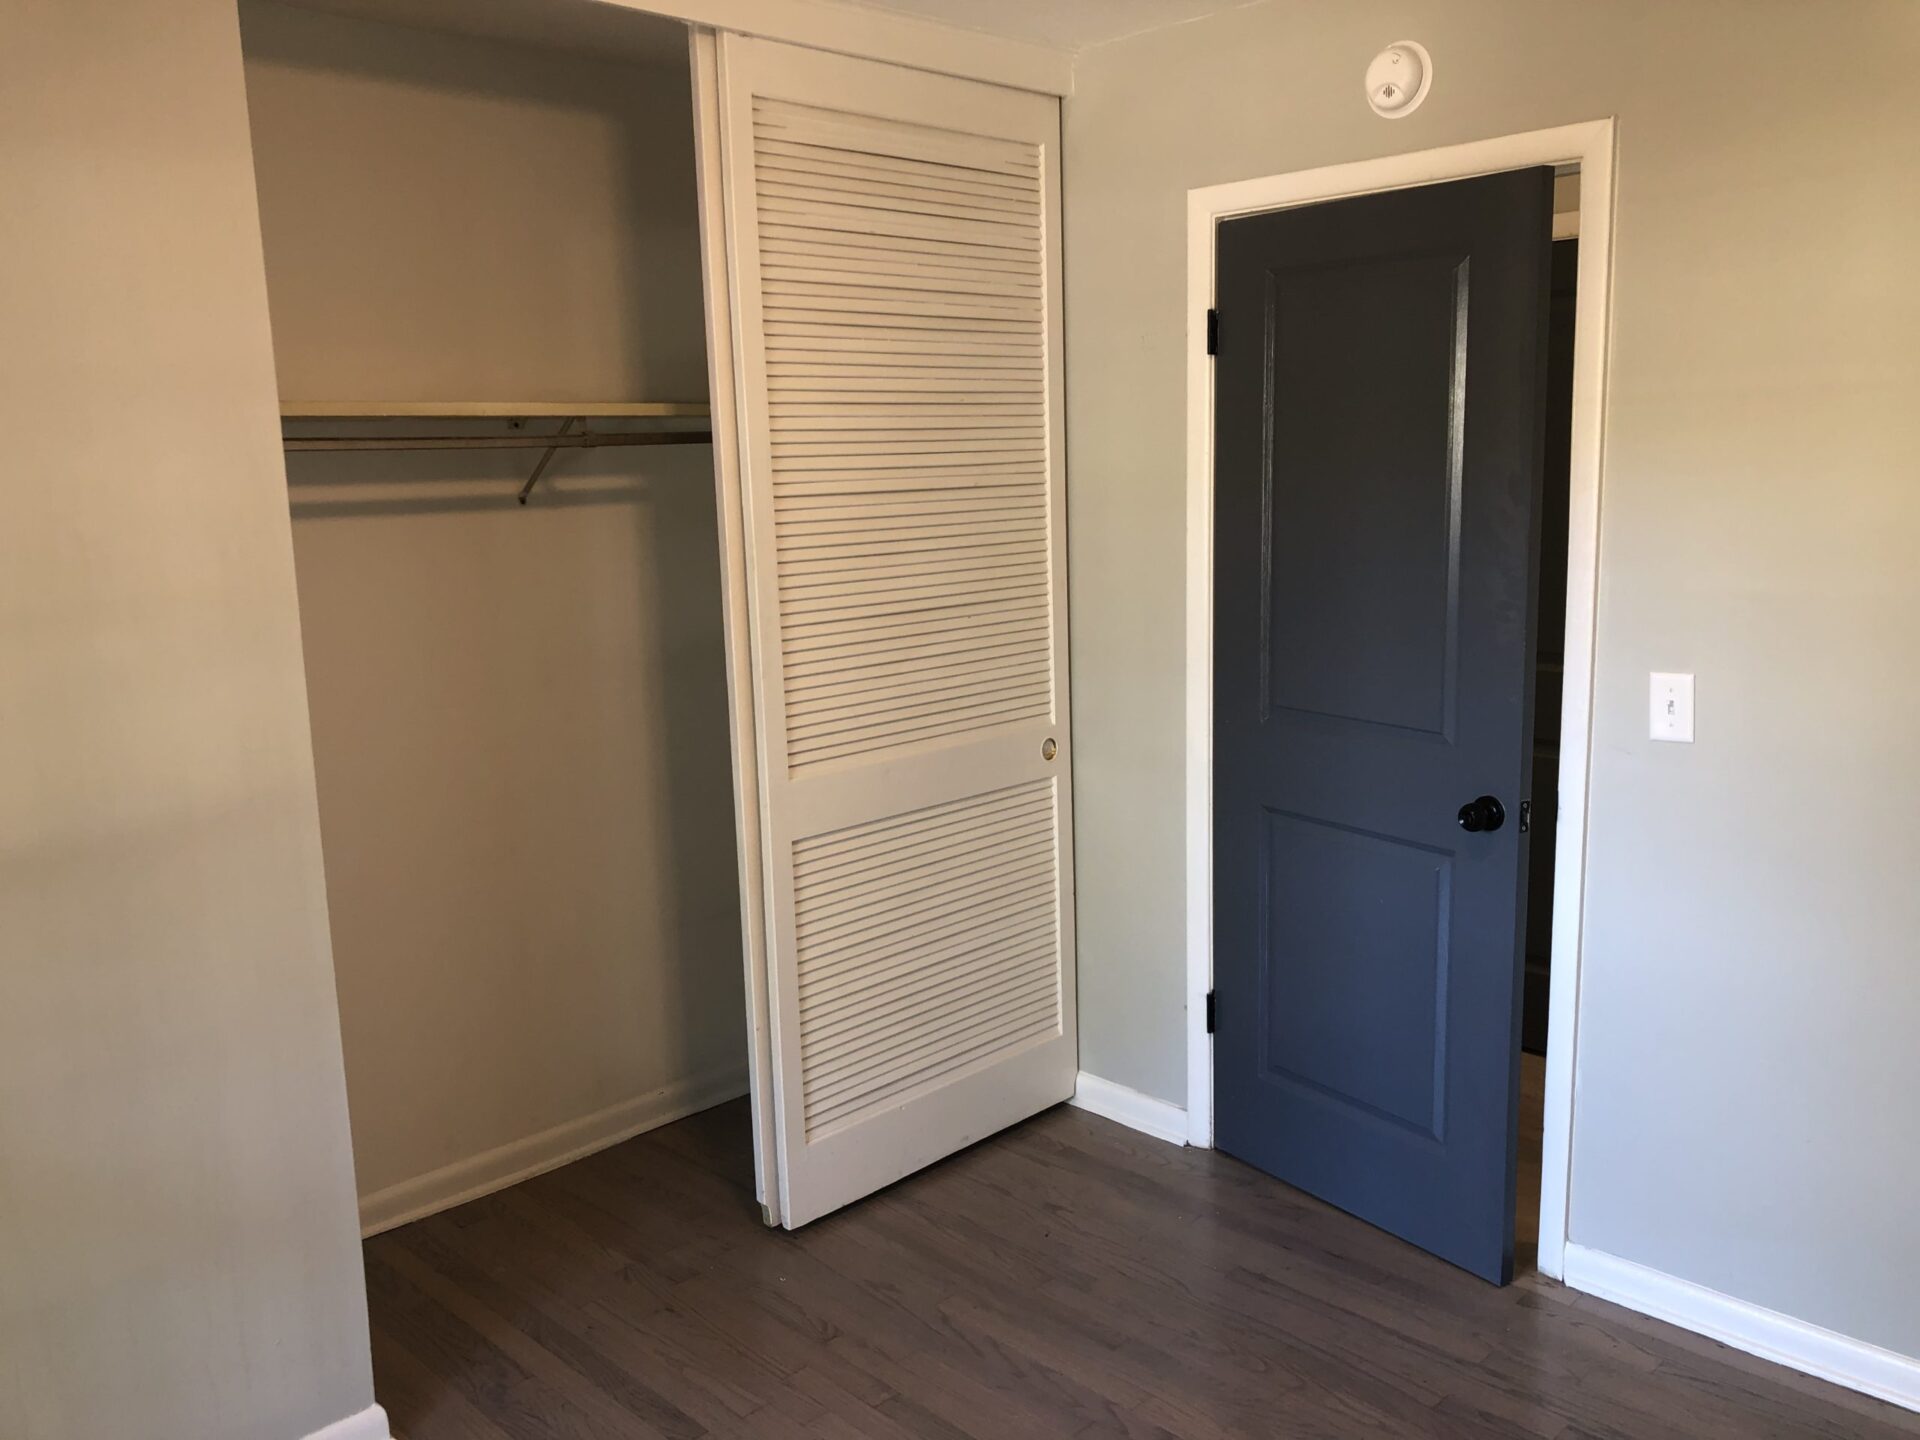 An image of house showing empty closet